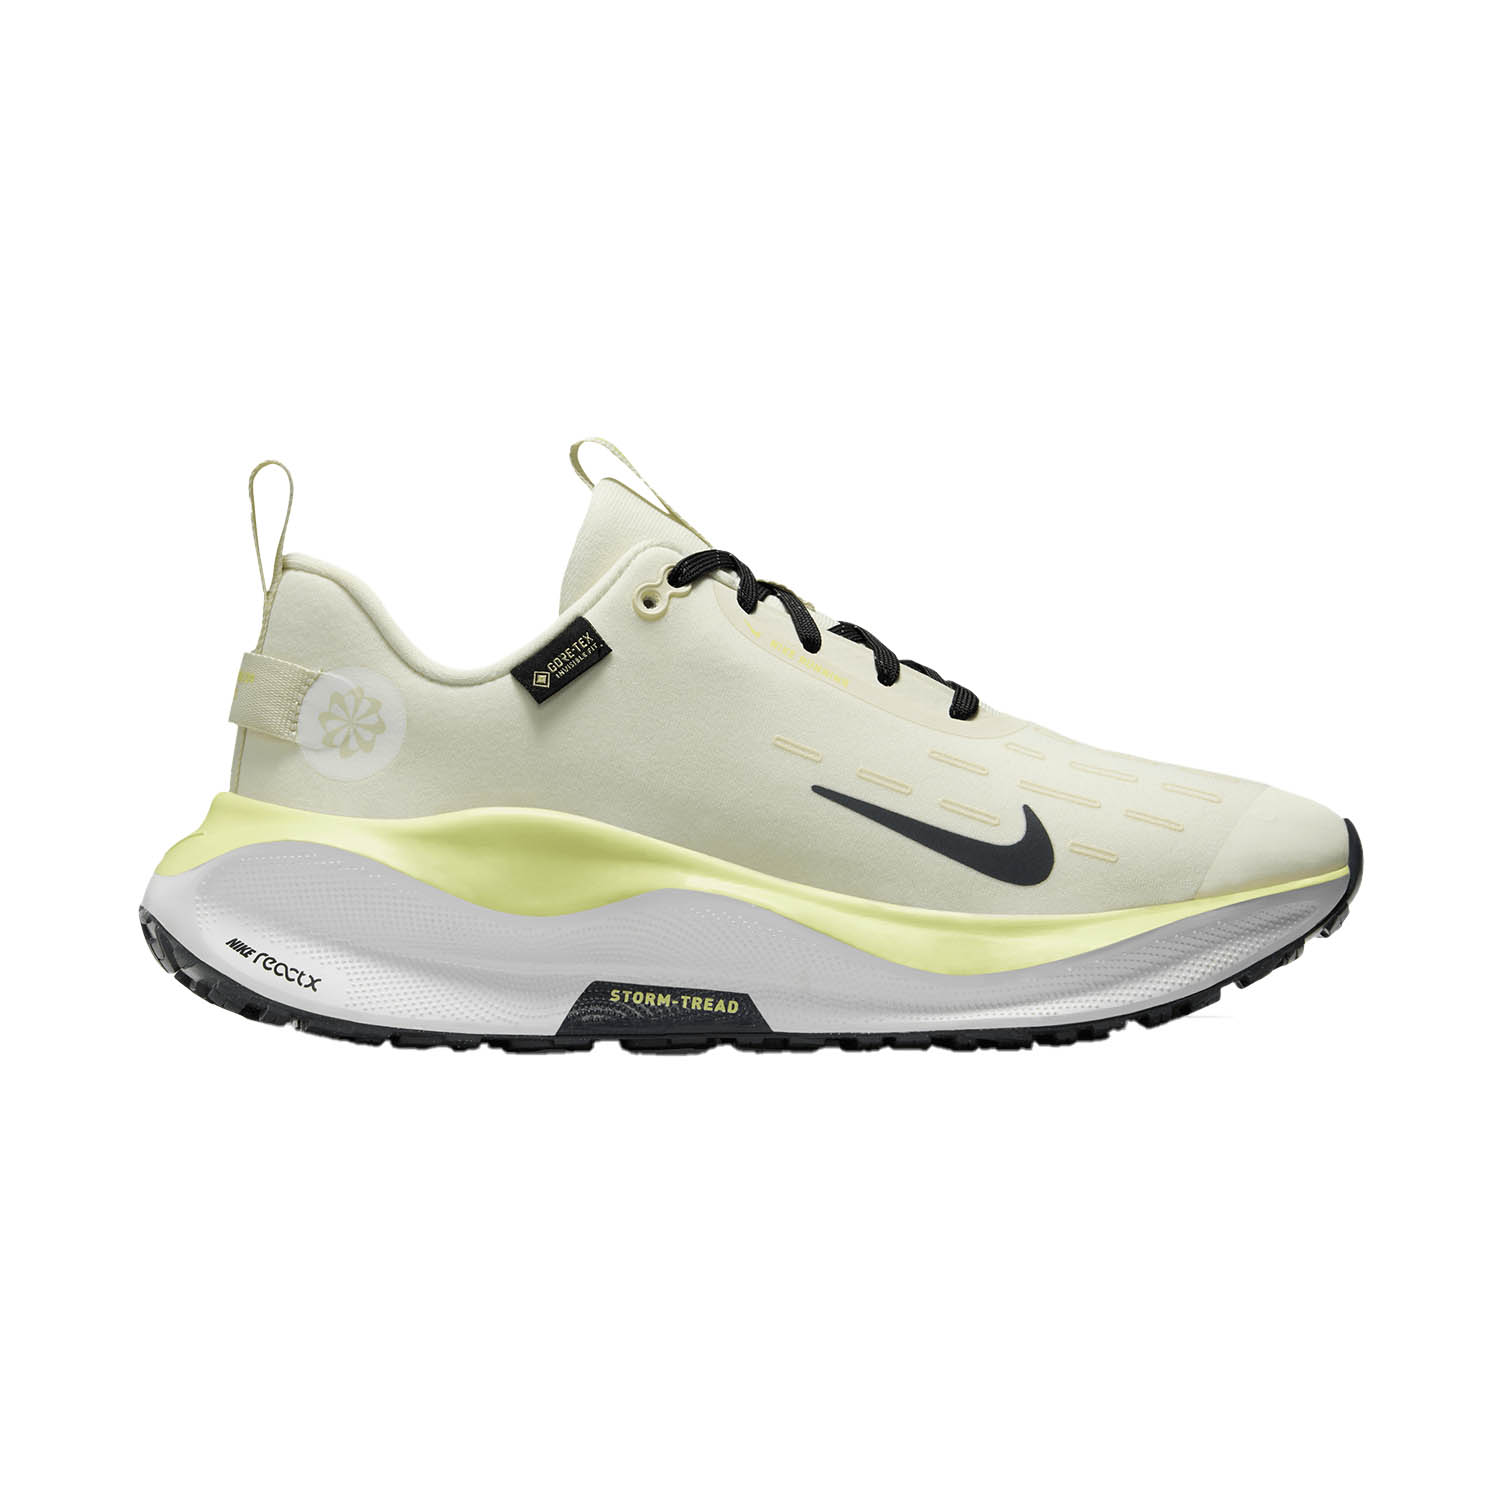 Nike InfinityRN 4 GTX - Pale Ivory/Anthracite/Summit White